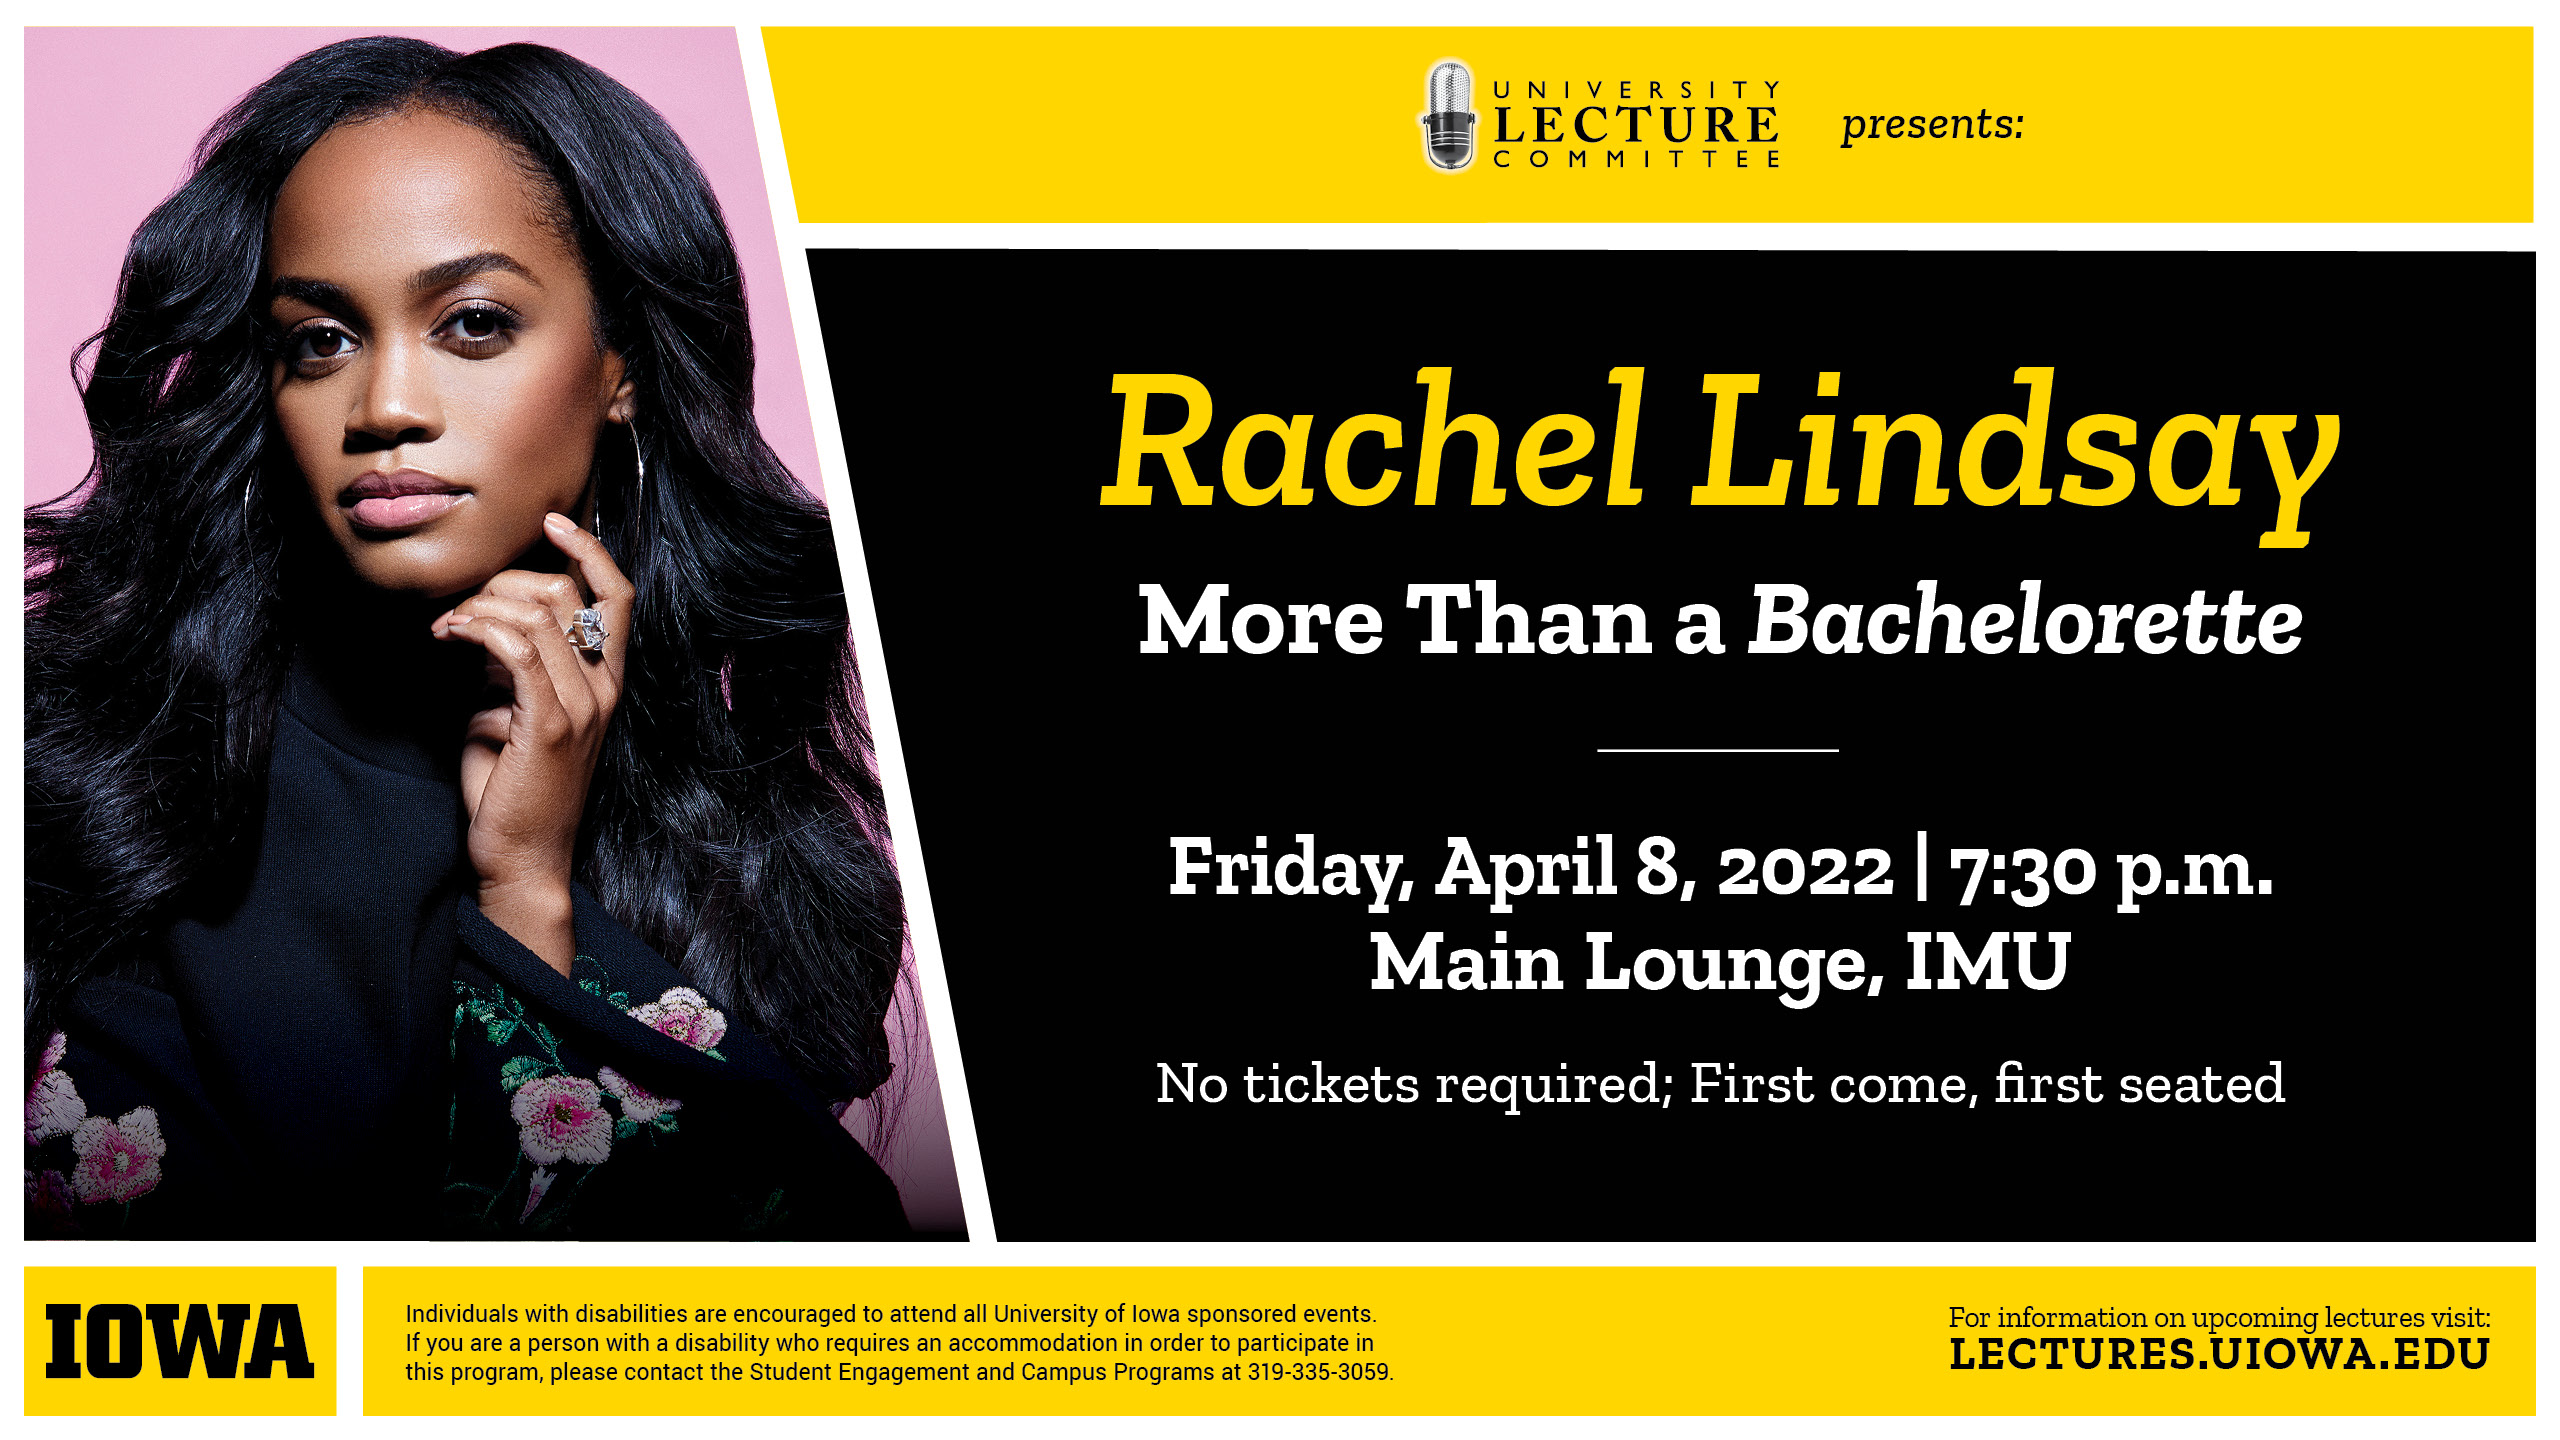 University Lecture Committee presents Rachel Lindsay: More than a Bachelorette Friday April 8, 2022 7:30 pm Main Lounge IMU